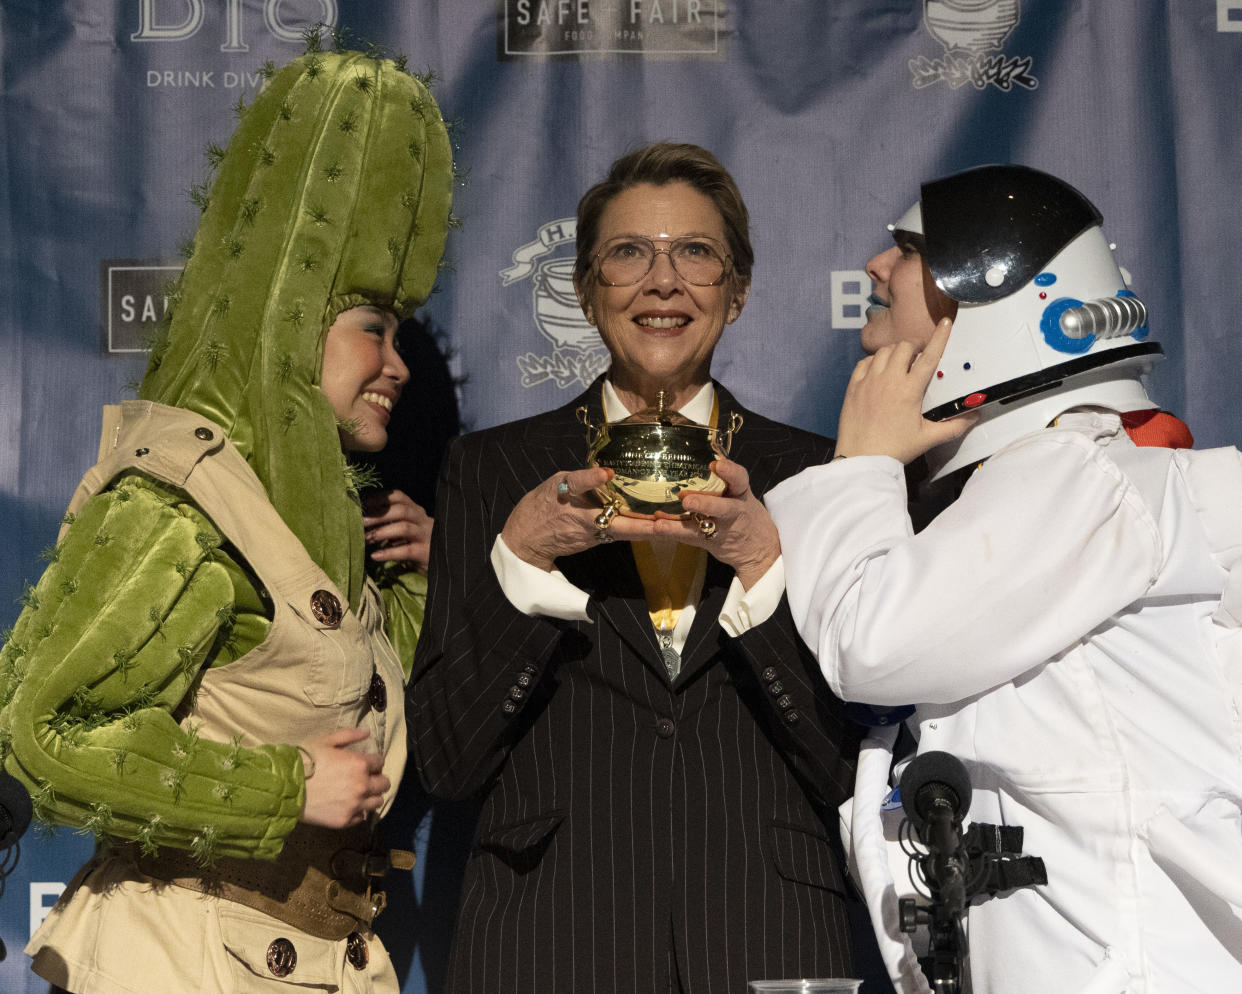 Annette Bening onstage holding the pudding pot award, flanked by two members of Harvard University’s Hasty Pudding Theatricals who were dressed as a cactus and an astronaut.